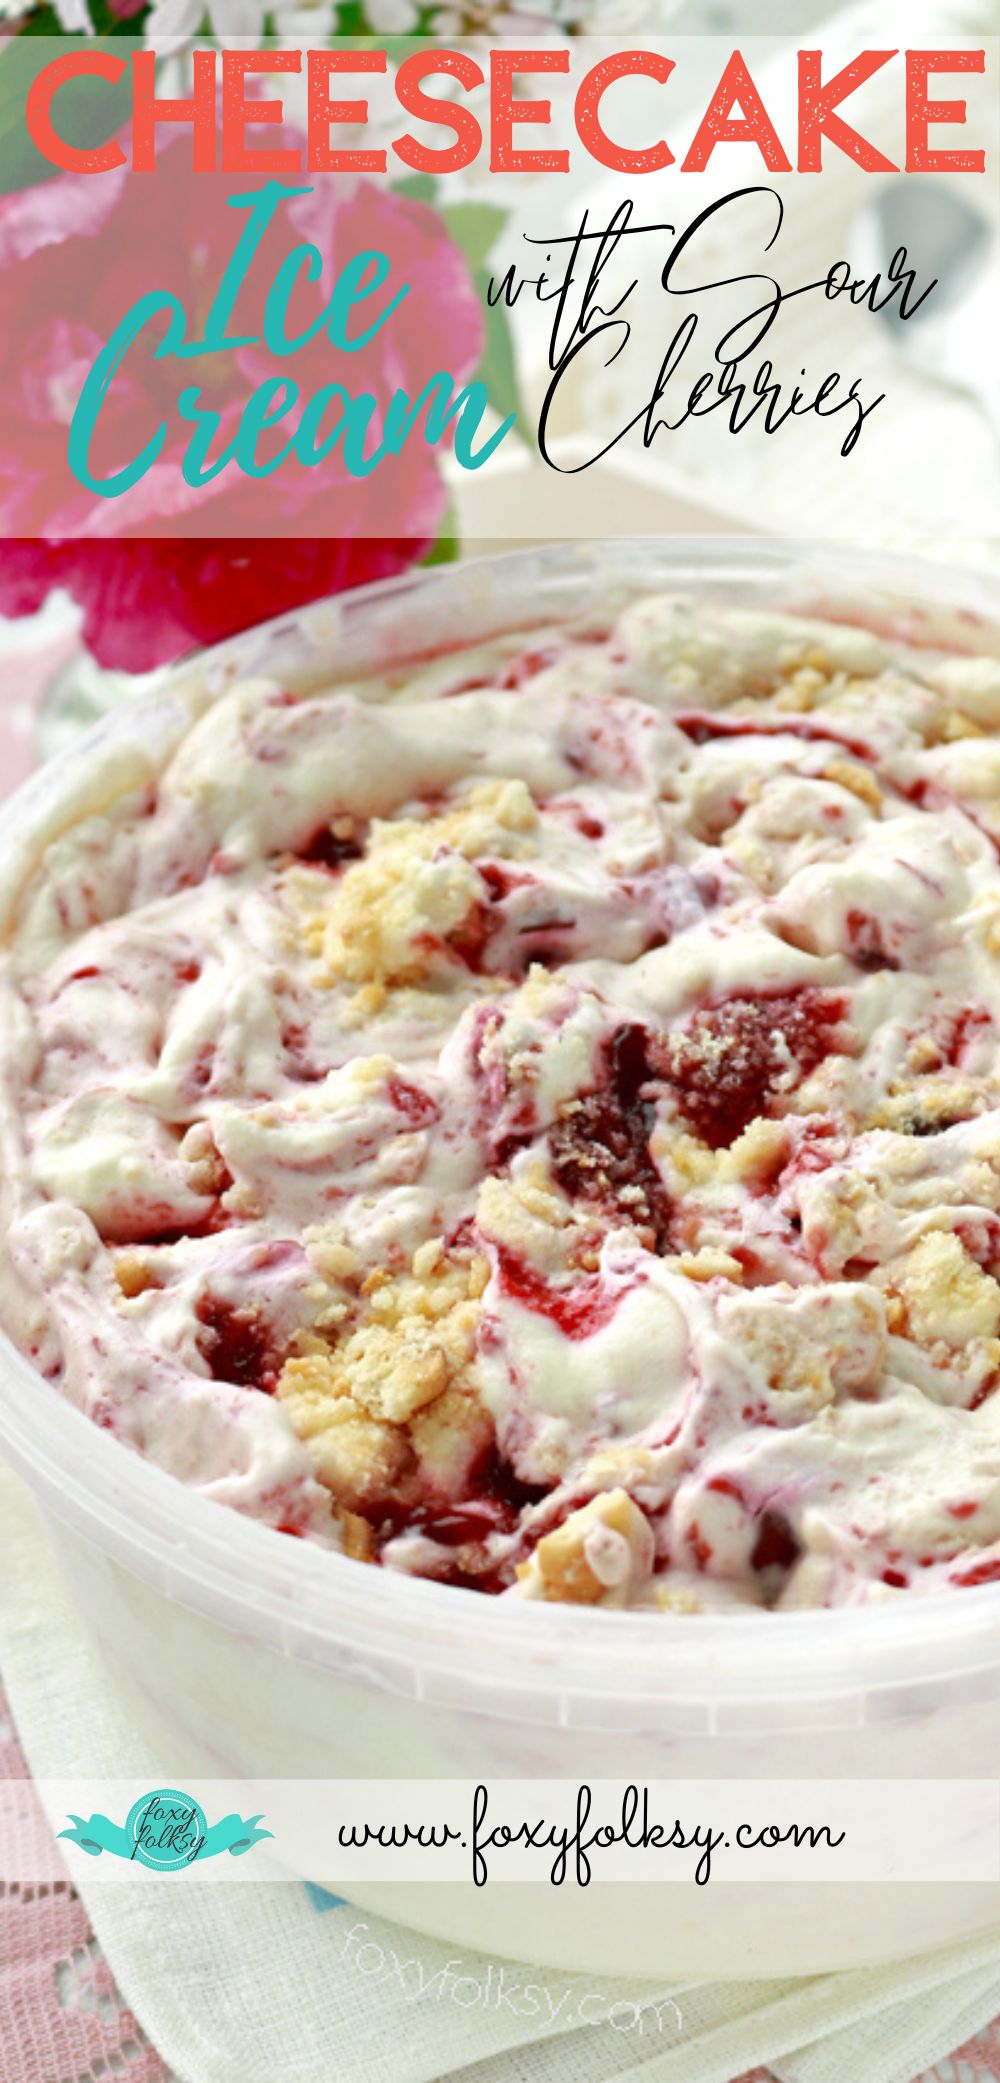 Cheesecake Ice Cream made with sour cherries.